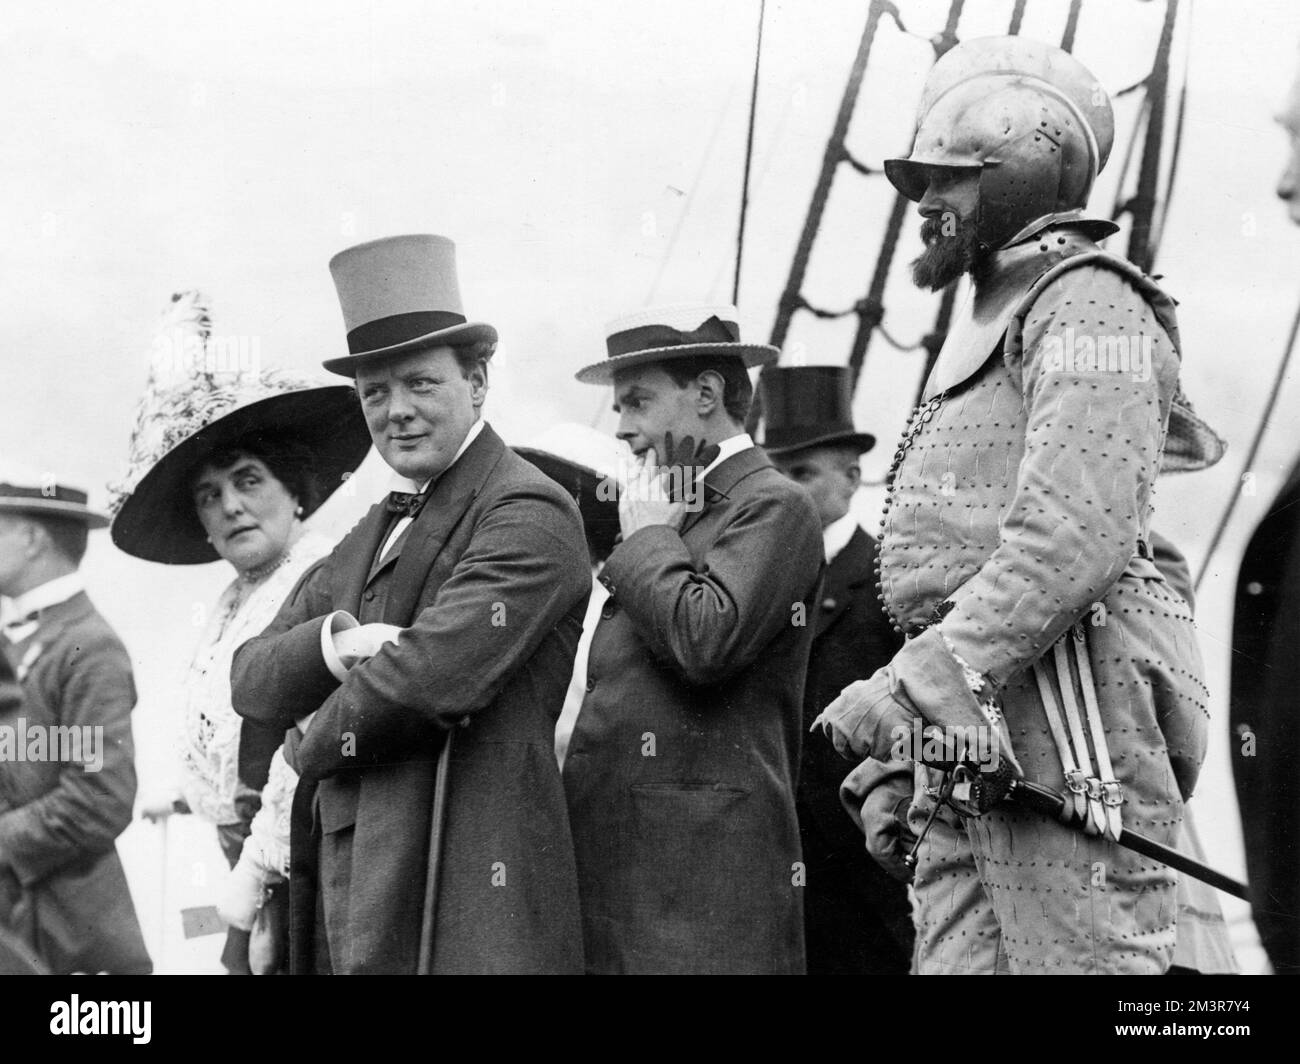 Winston Churchill at the 'Shakespeare's England' exhibition at Earls Court, west London in 1912. He is seen here on board a replica of the Elizabethan ship 'Revenge'.     Date: 1912 Stock Photo